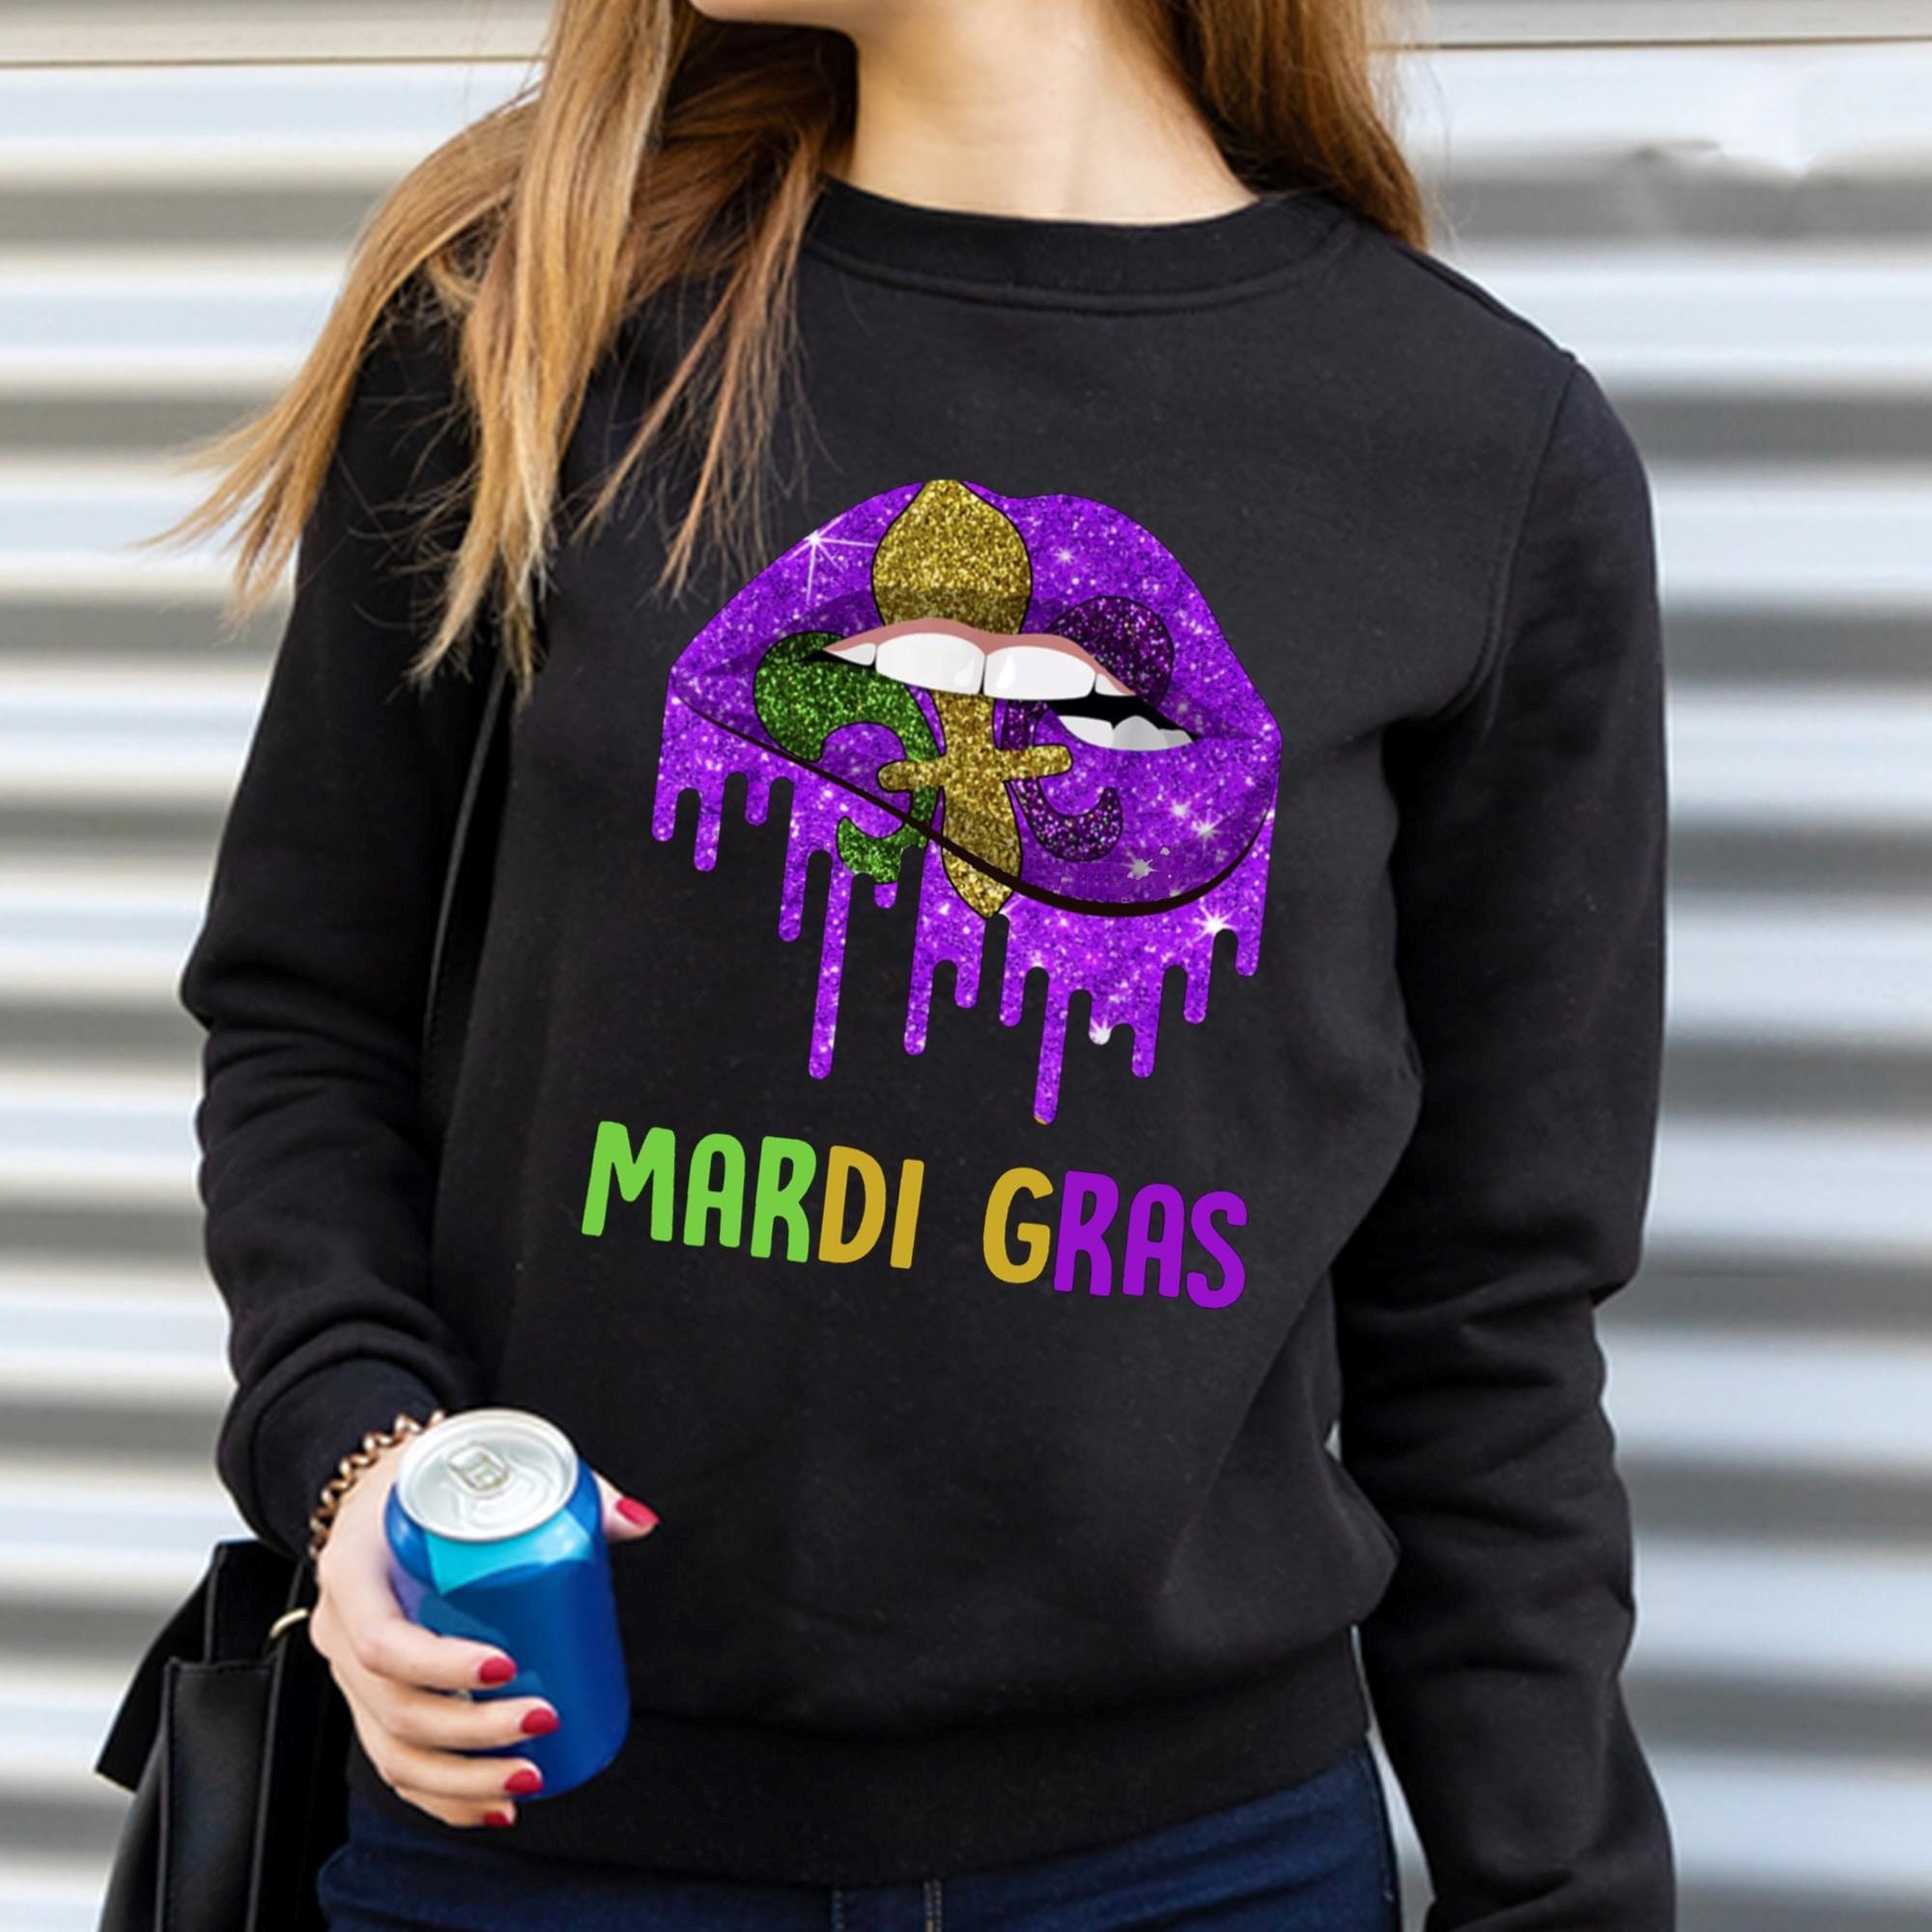 Mardi Gras Dripping Lips Shirt New Orleans Carnival Costume | Etsy